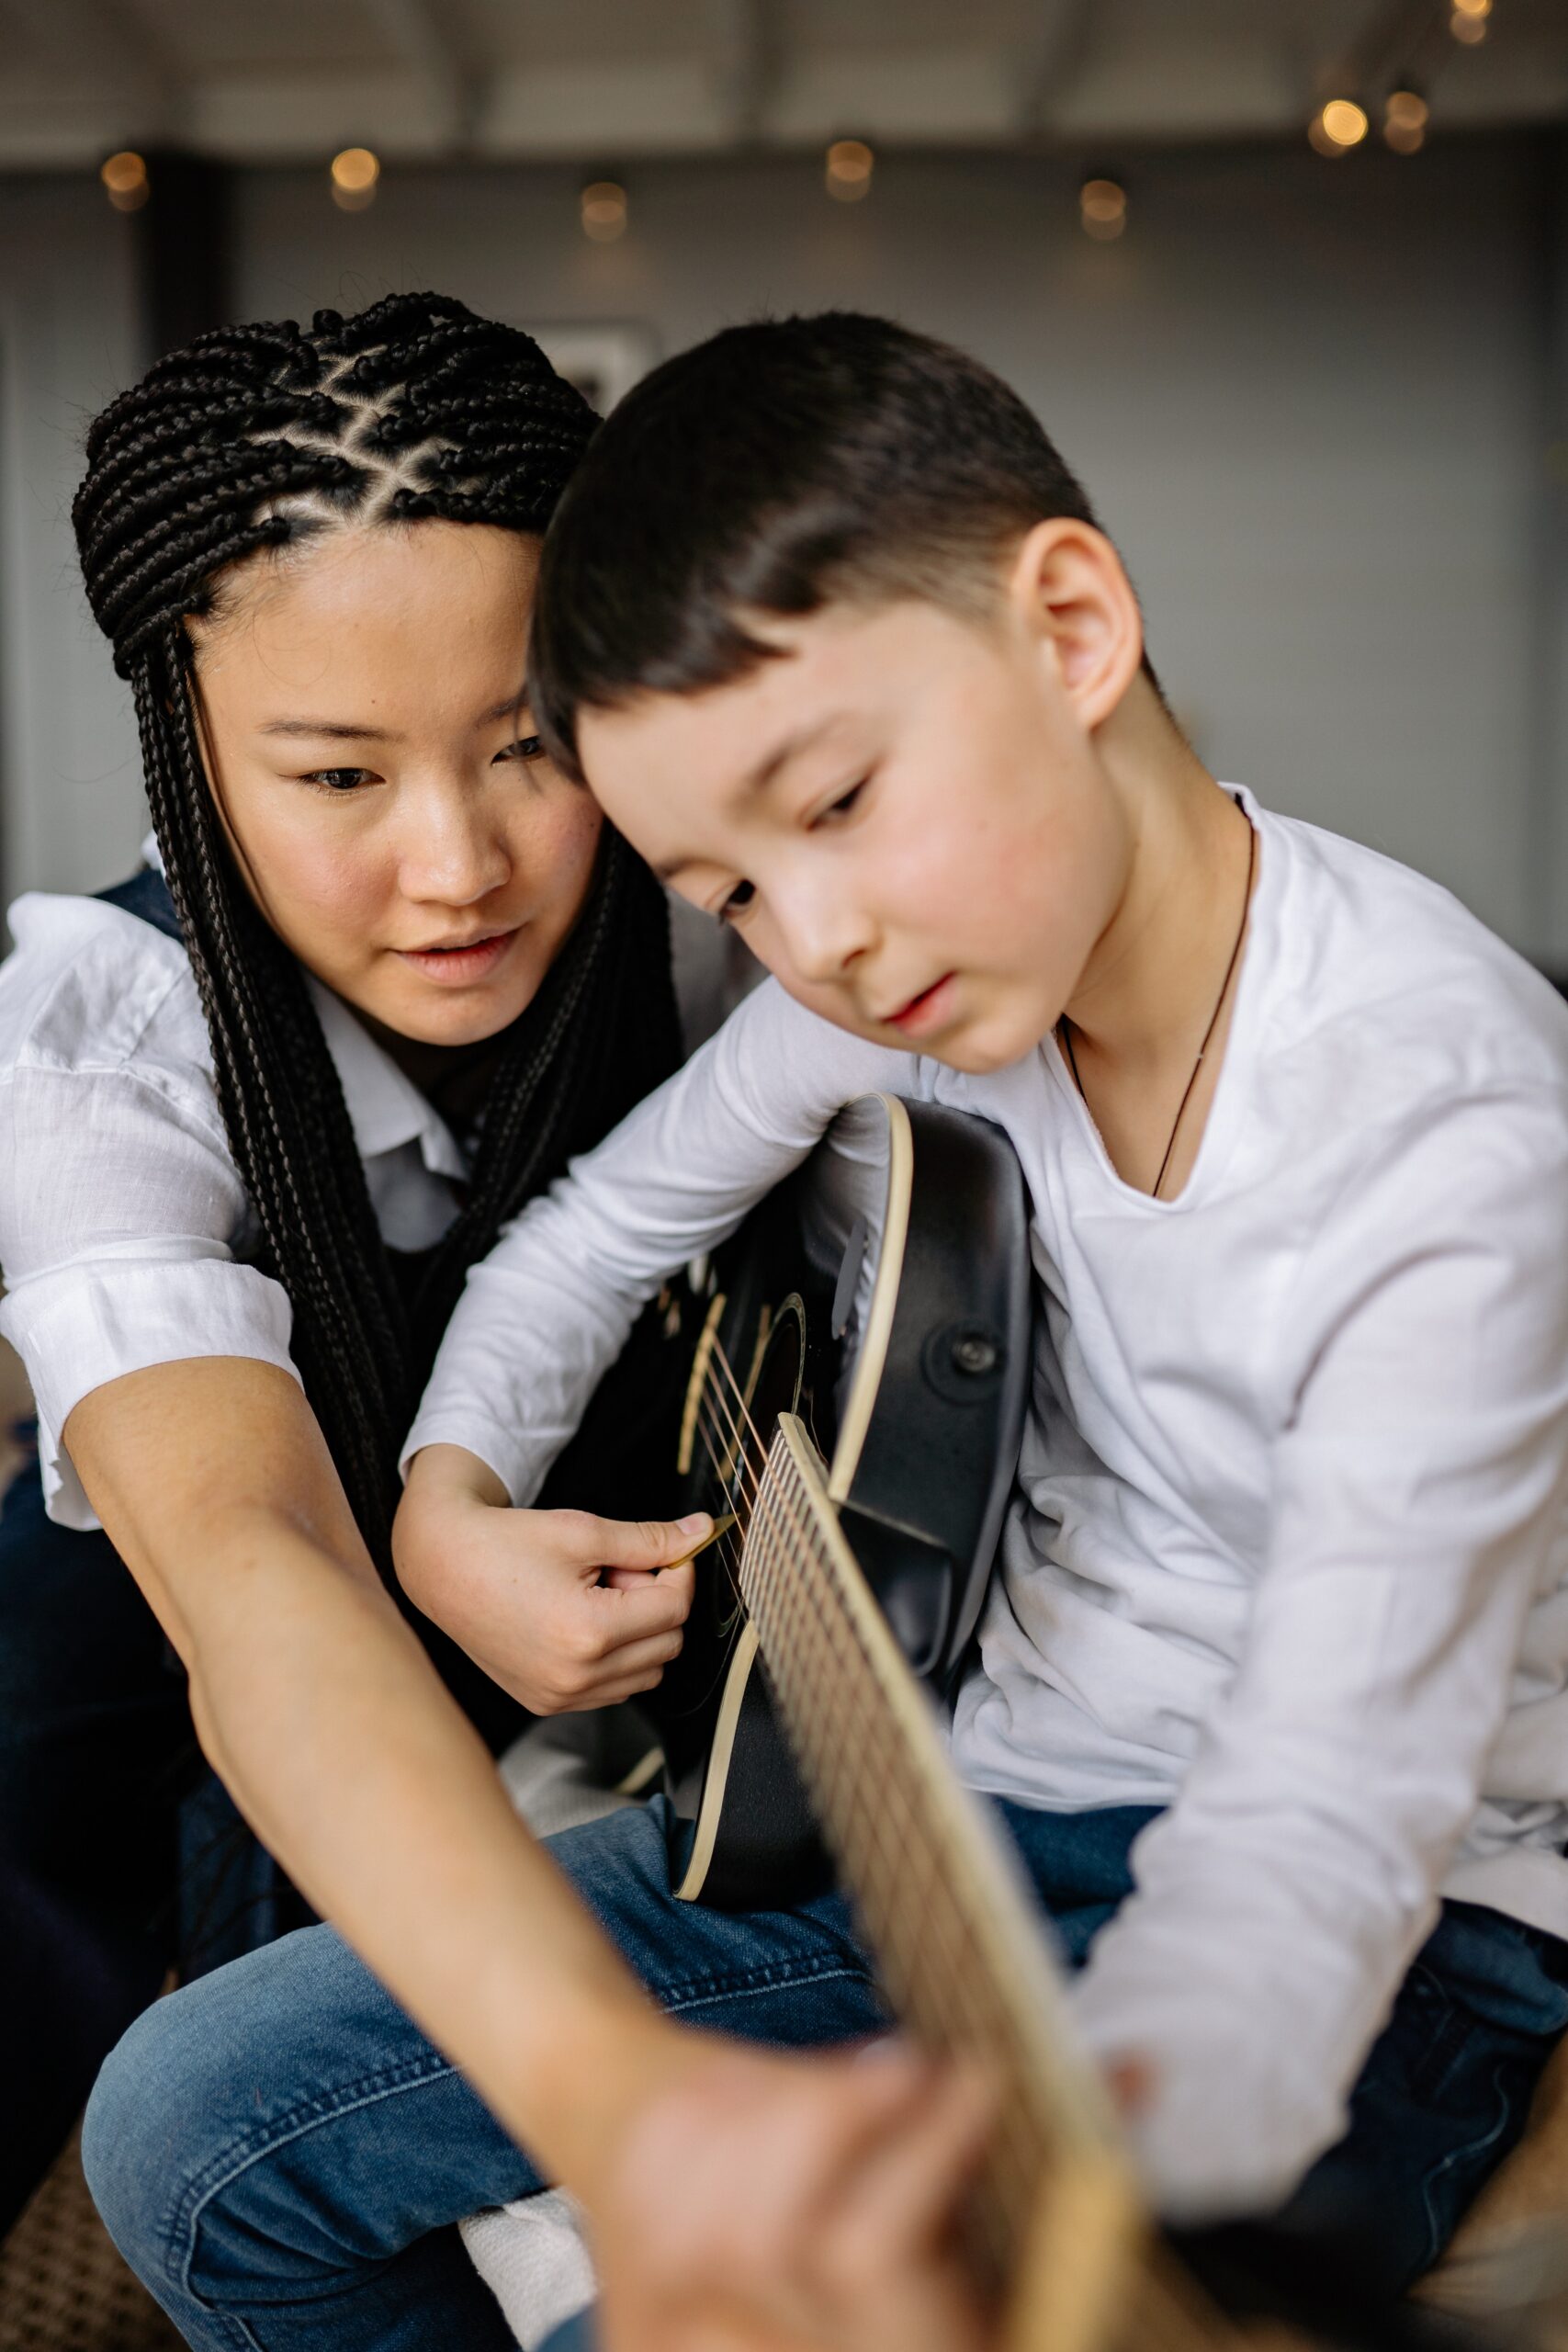 instructor guiding young student holding guitar taking guitar lesson